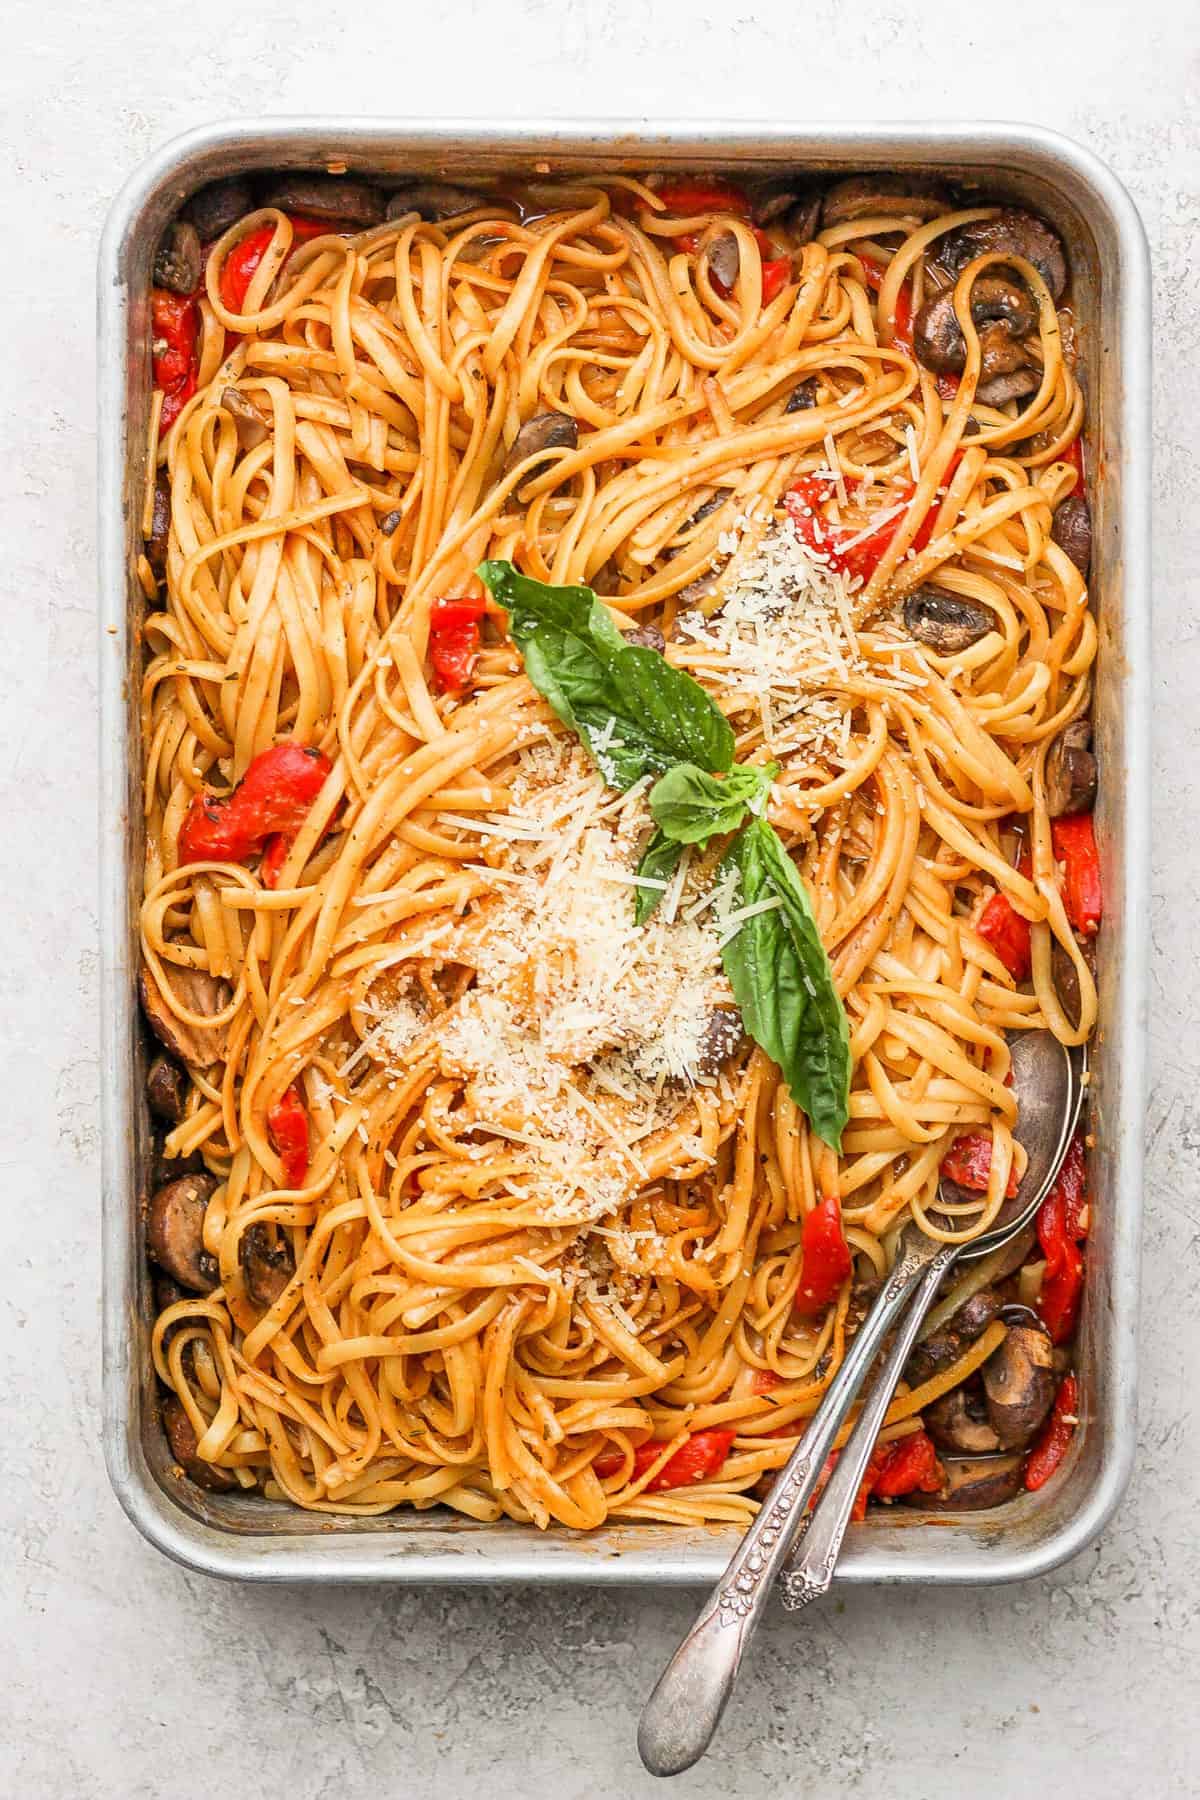 One-pot pasta (in the oven!)-suitable for gourmets to discover - injuredly